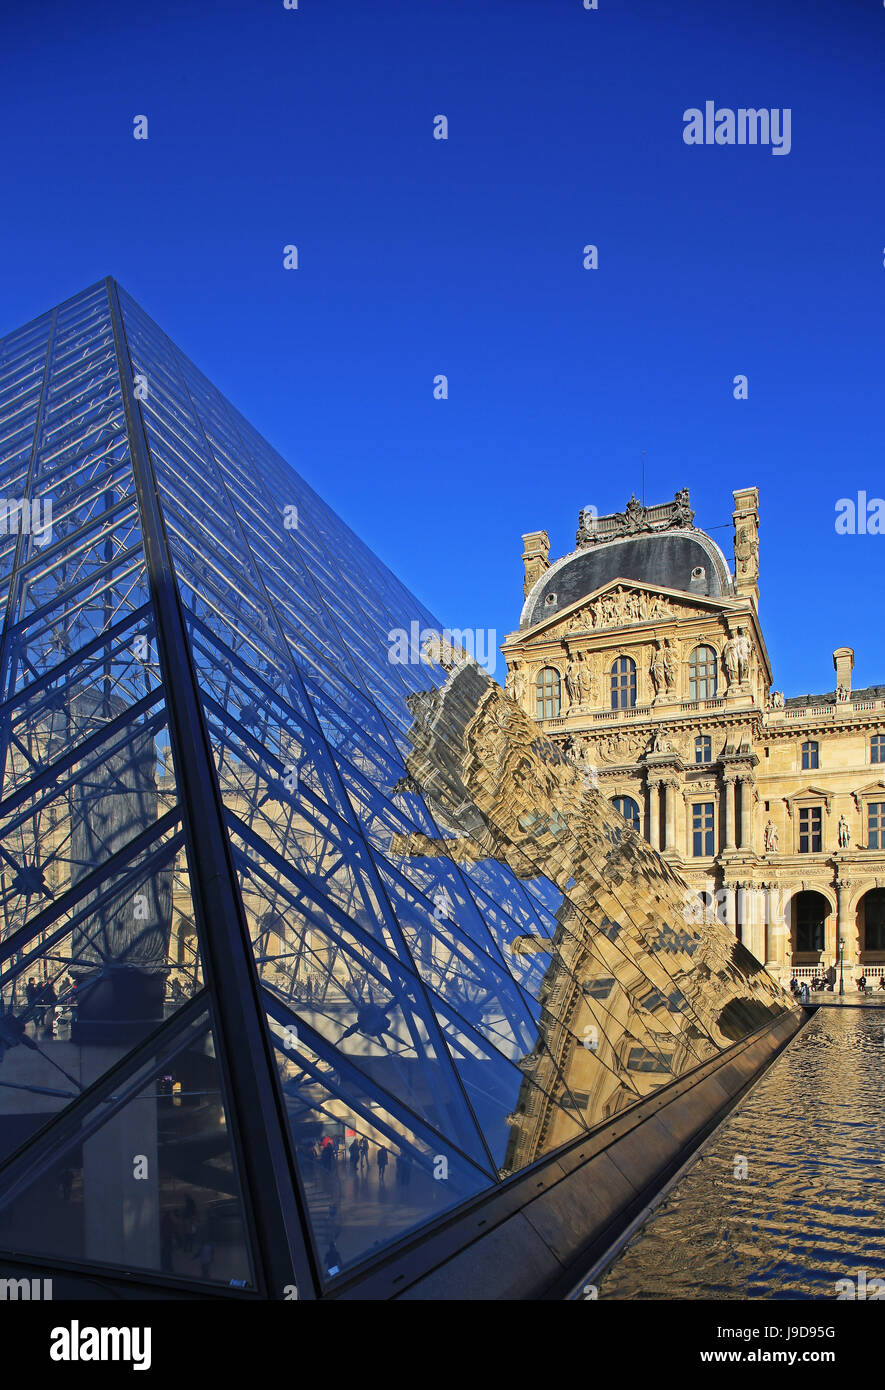 Pyramid of the Louvre, Paris, France, Europe Stock Photo